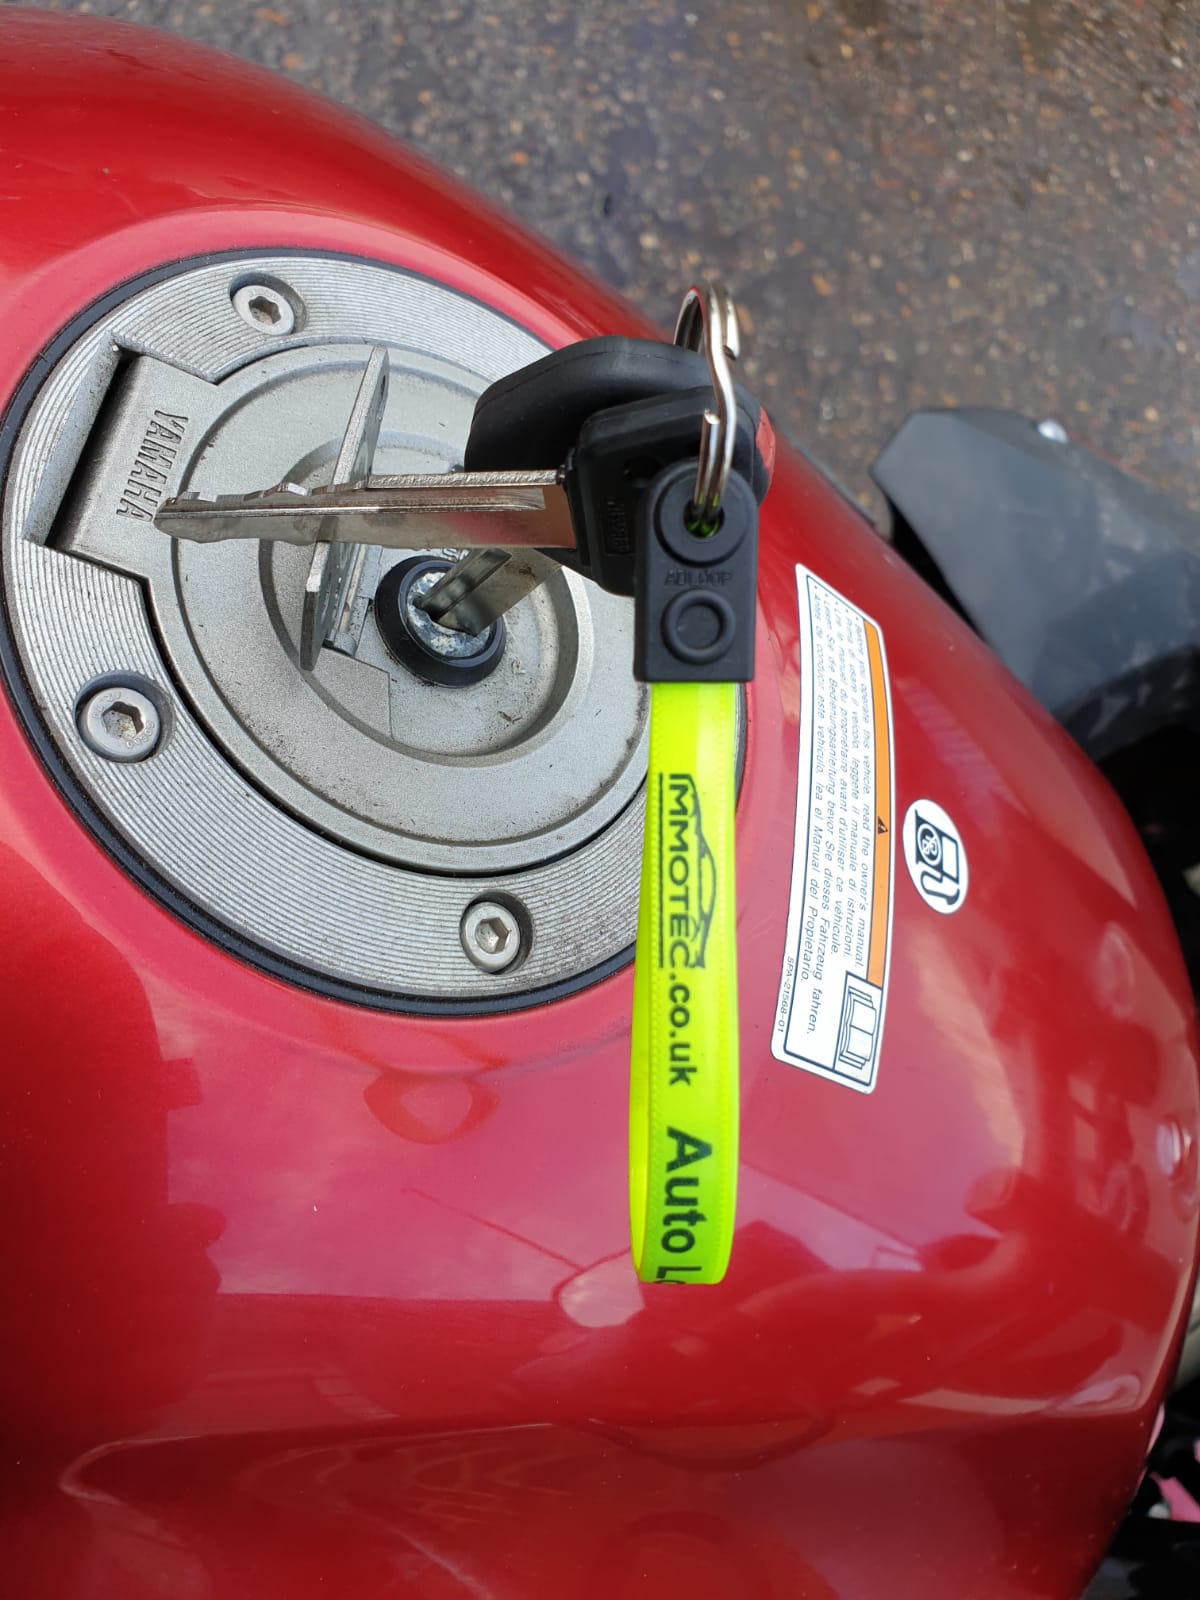 We can replace lost or stolen motorcycle keys